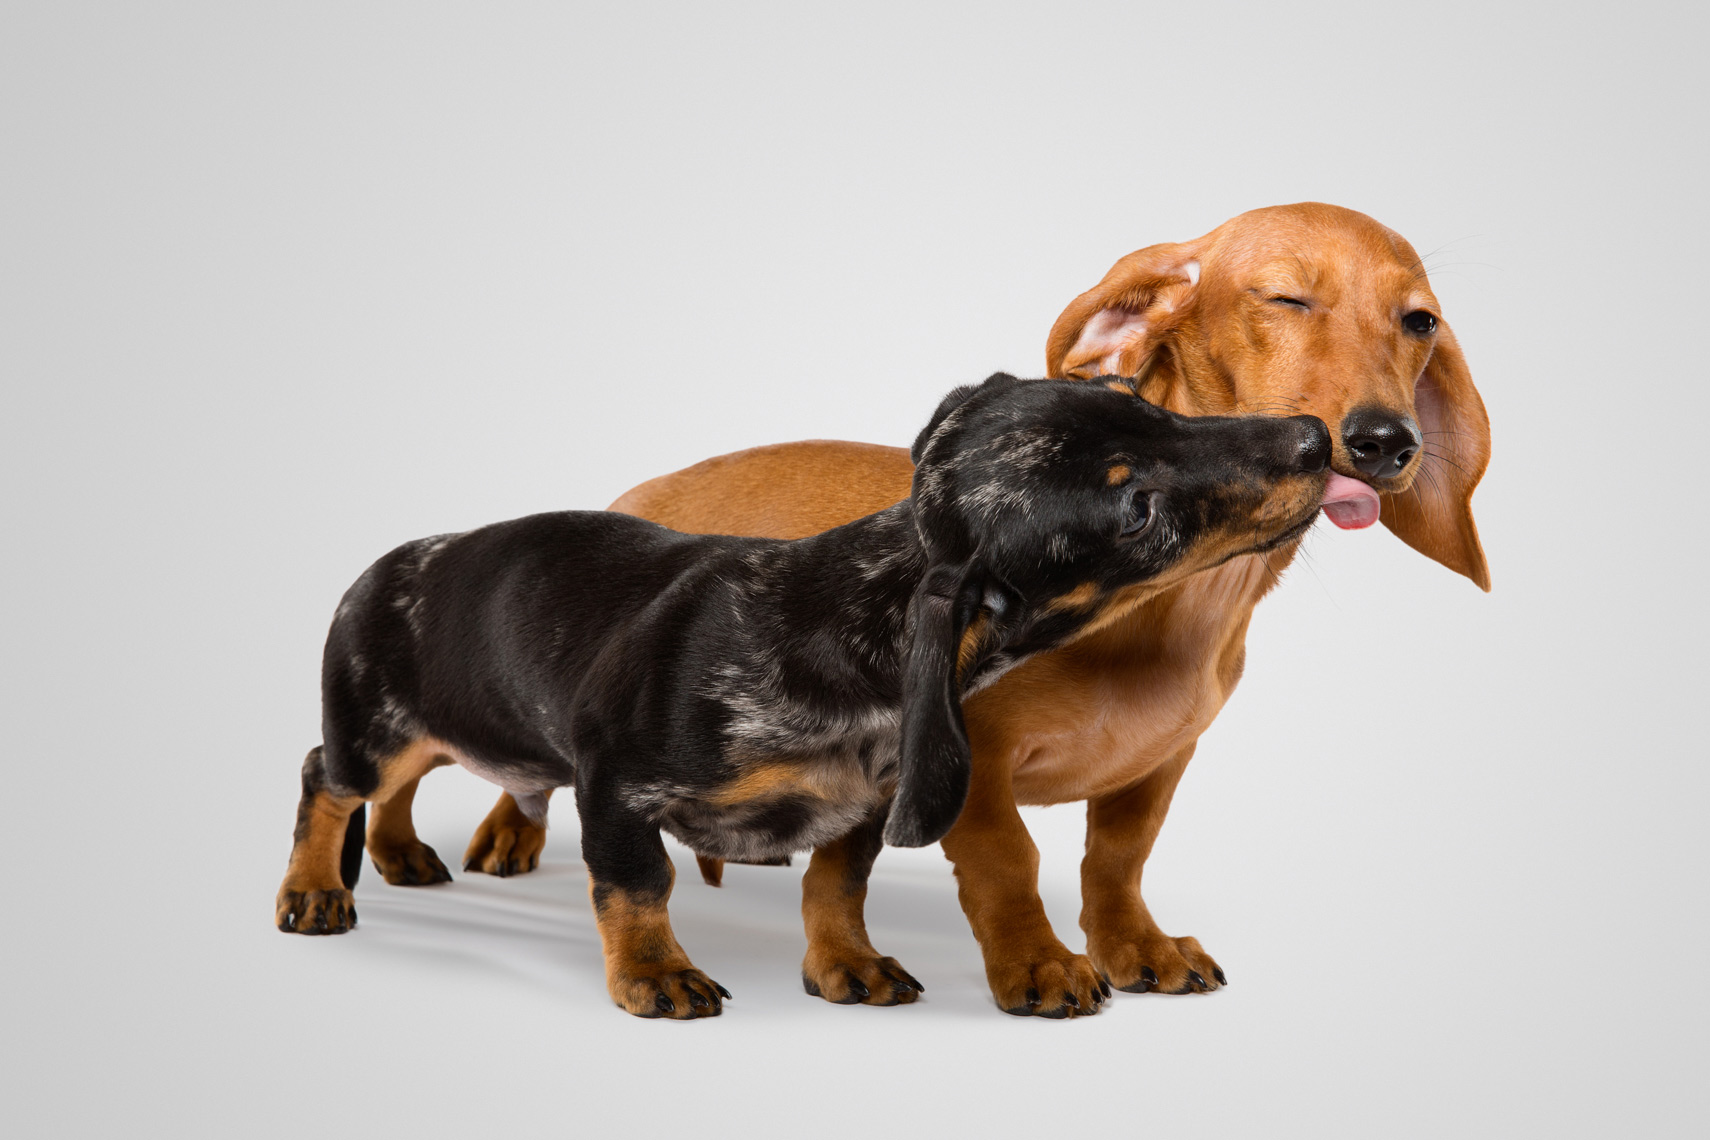 Two dachshund puppies licking each other 